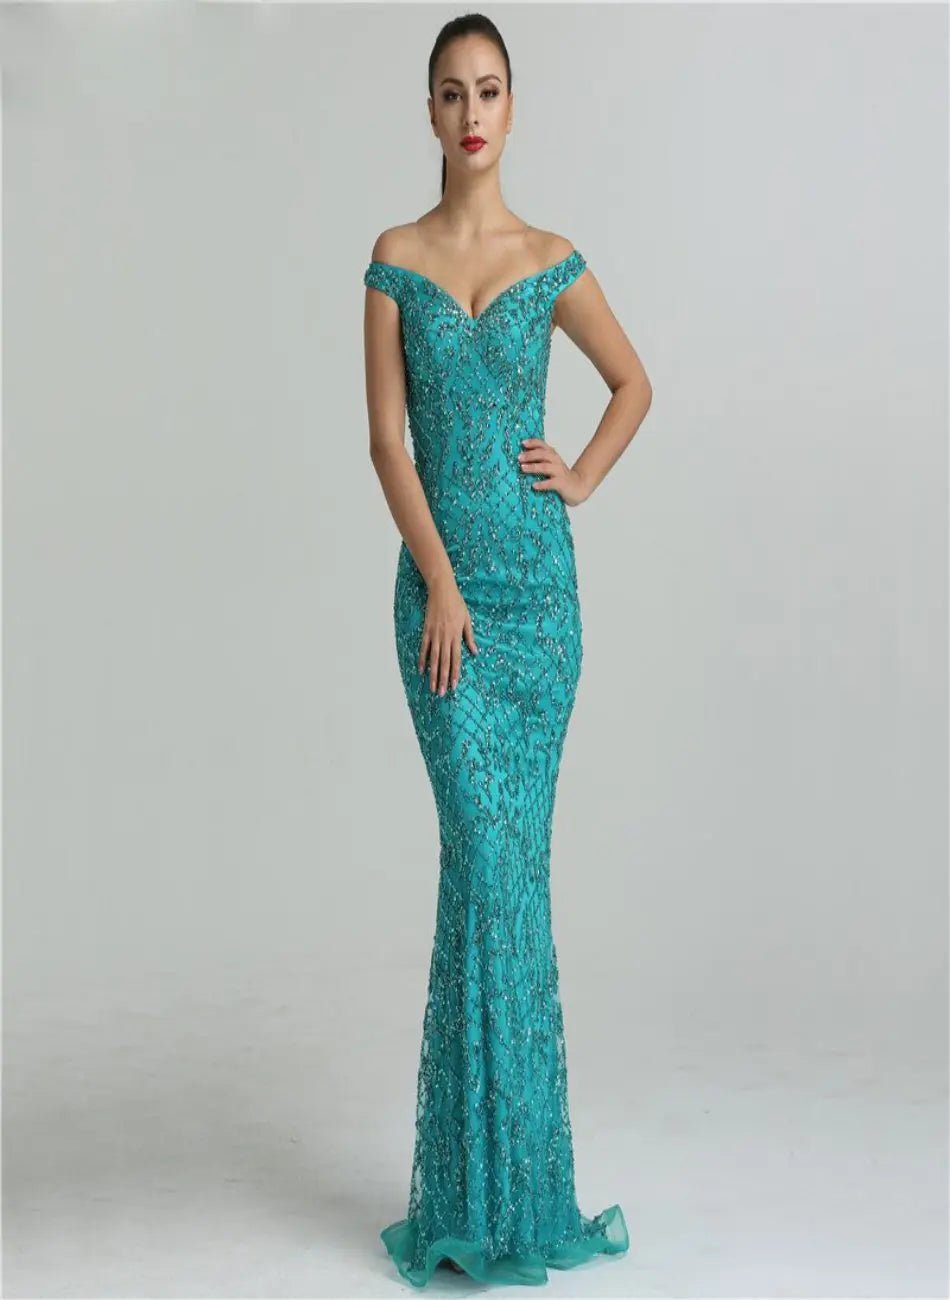 Jovanni Beading Off Shoulder Evening Gown - Mscooco.co.uk